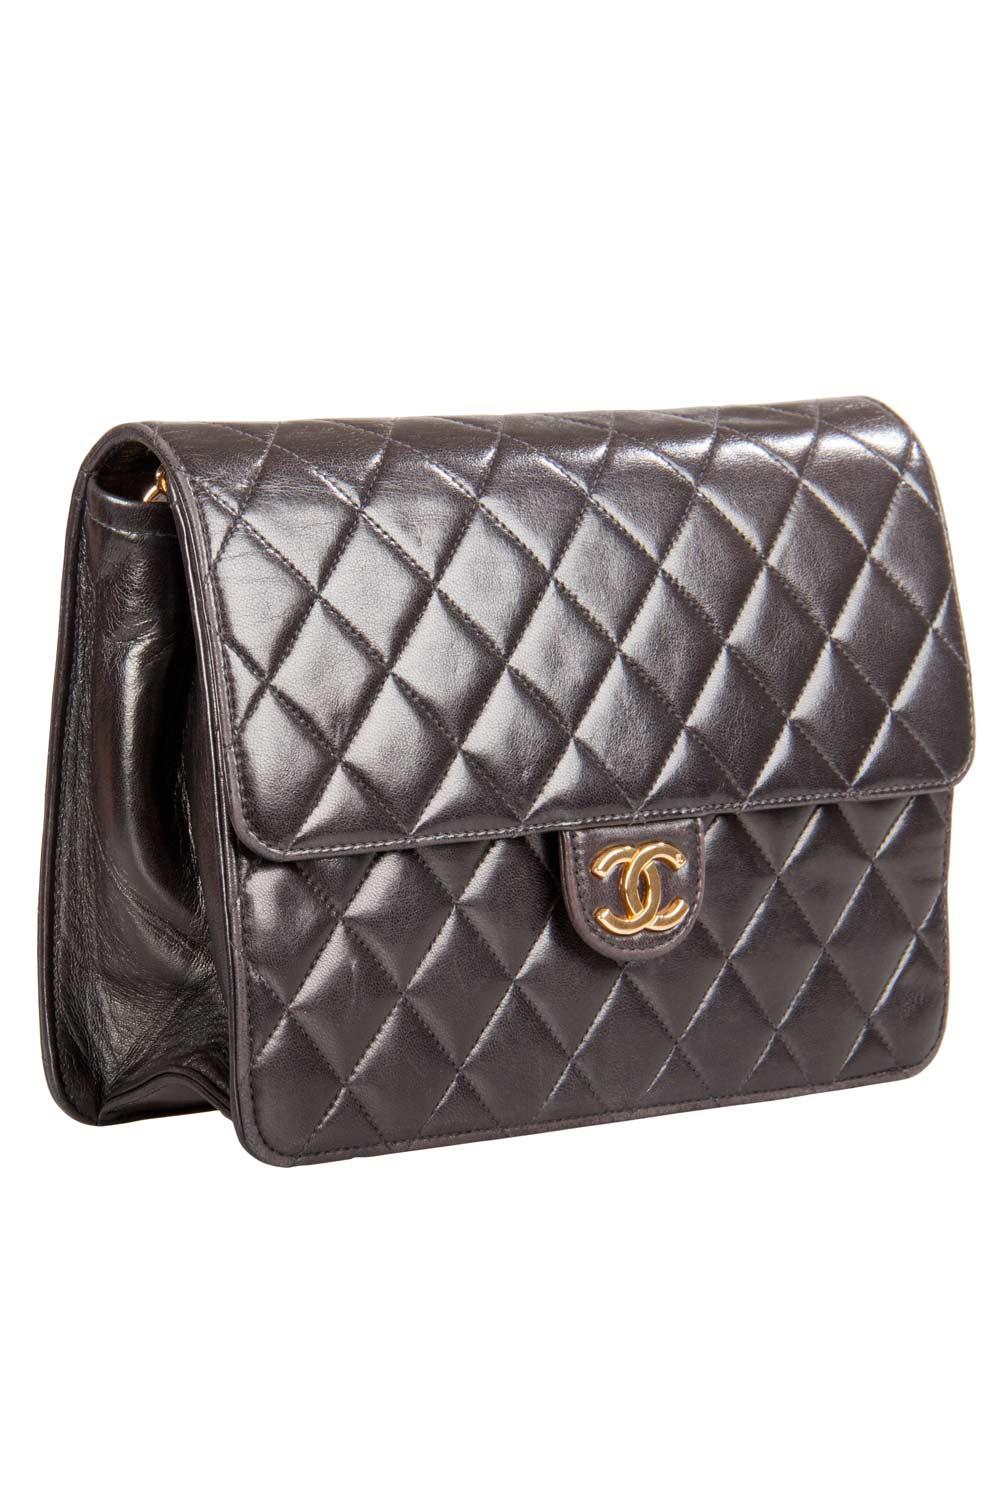 Chanel Black Quilted Leather Small Vintage Classic Single Flap Bag In Good Condition In Dubai, Al Qouz 2